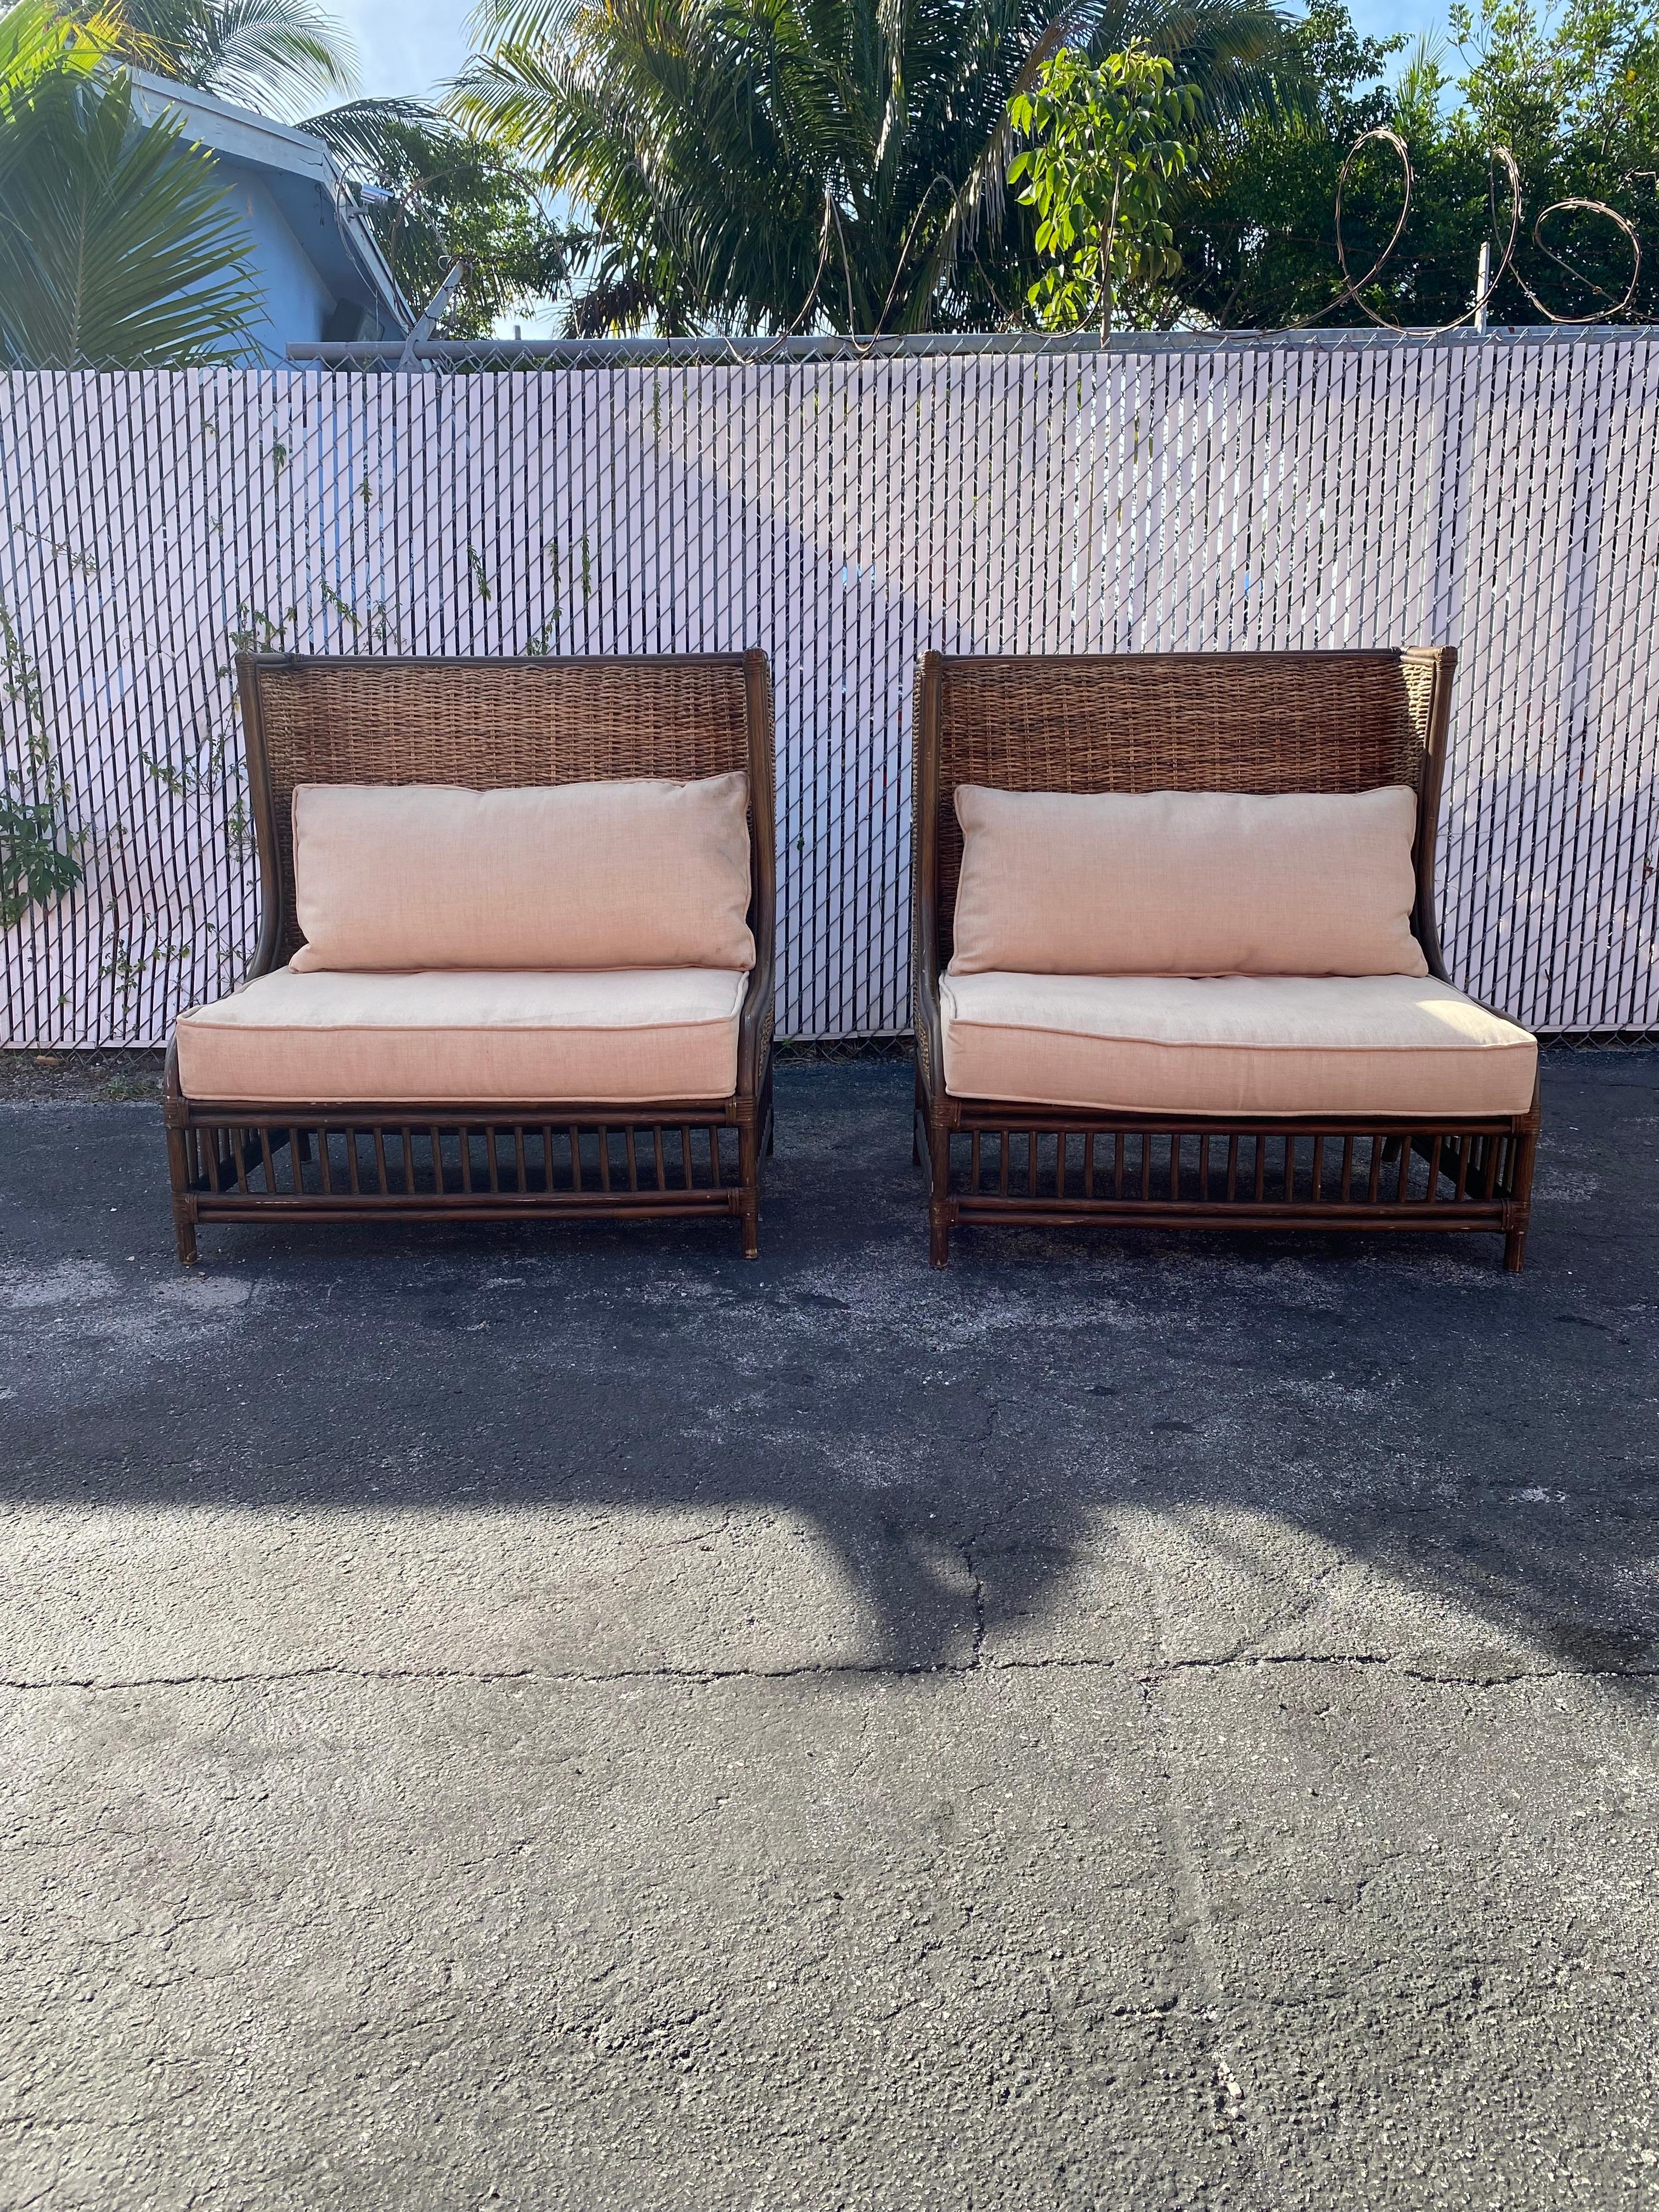 On offer on this occasion is one of the most stunning, Settee set you could hope to find. Outstanding design is exhibited throughout. The beautiful set is statement piece which is also extremely comfortable and packed with personality!! Just look at